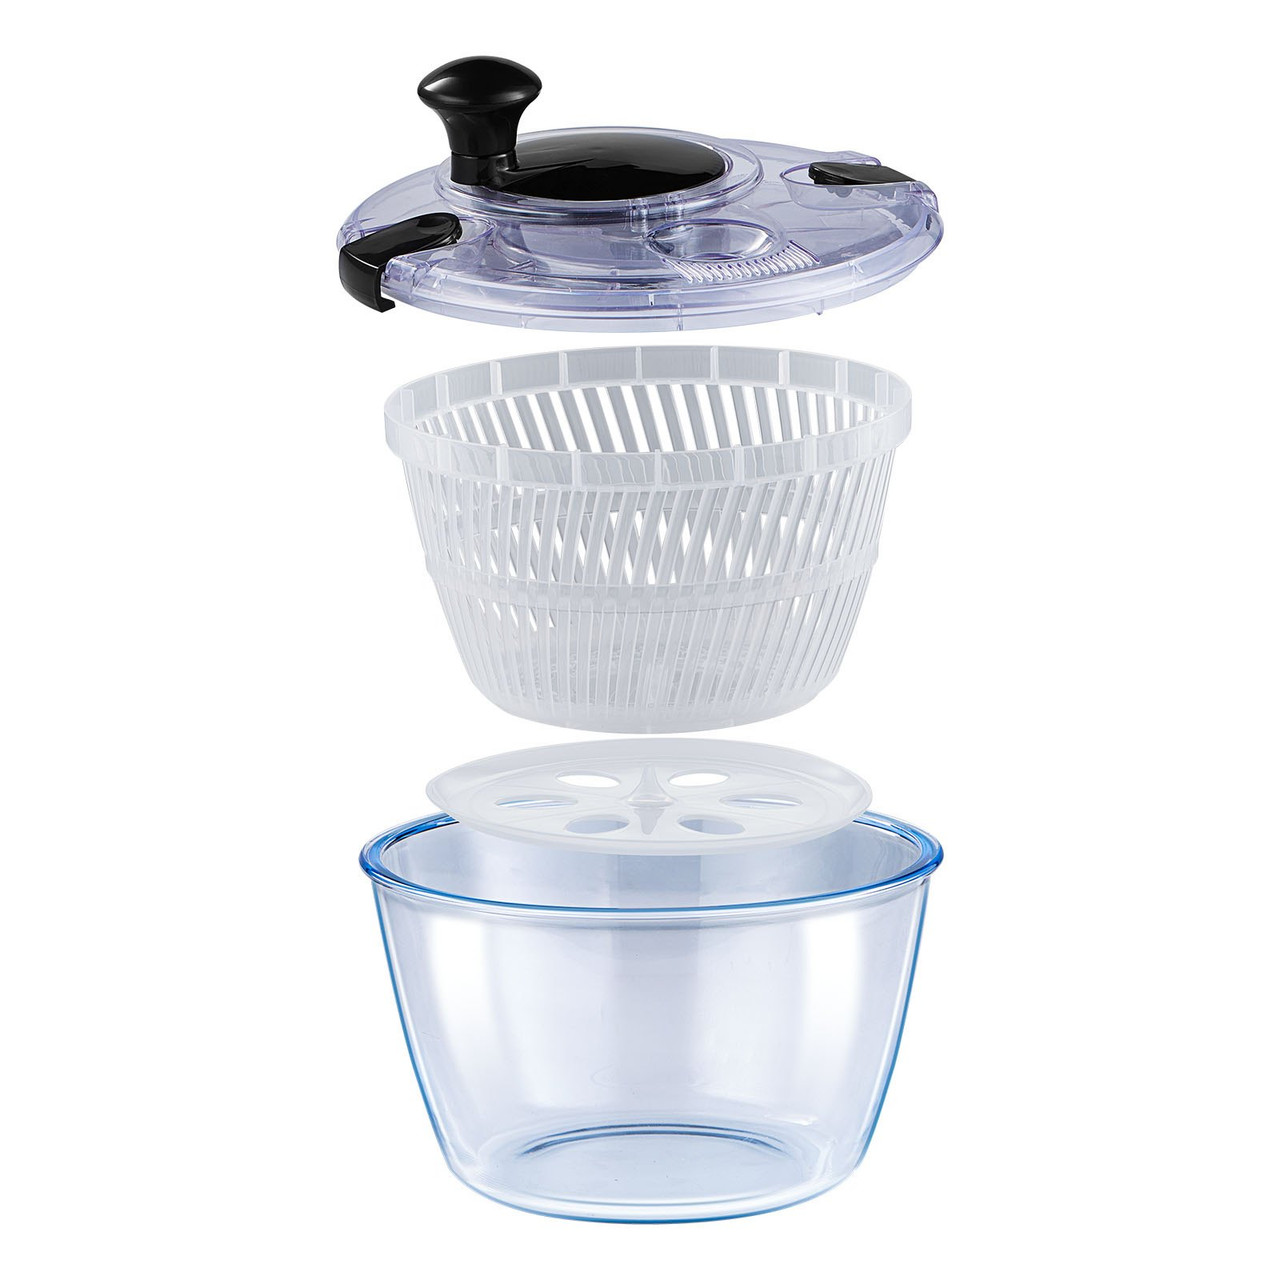 VEVOR Glass Salad Spinner, 4.75Qt, One-handed Easy Press Large Vegetable Dryer Washer, Lettuce Cleaner and Dryer with High Borosilicate Glass Bowl Lid, for Greens, Herbs, Berries, Fruits, No BPA